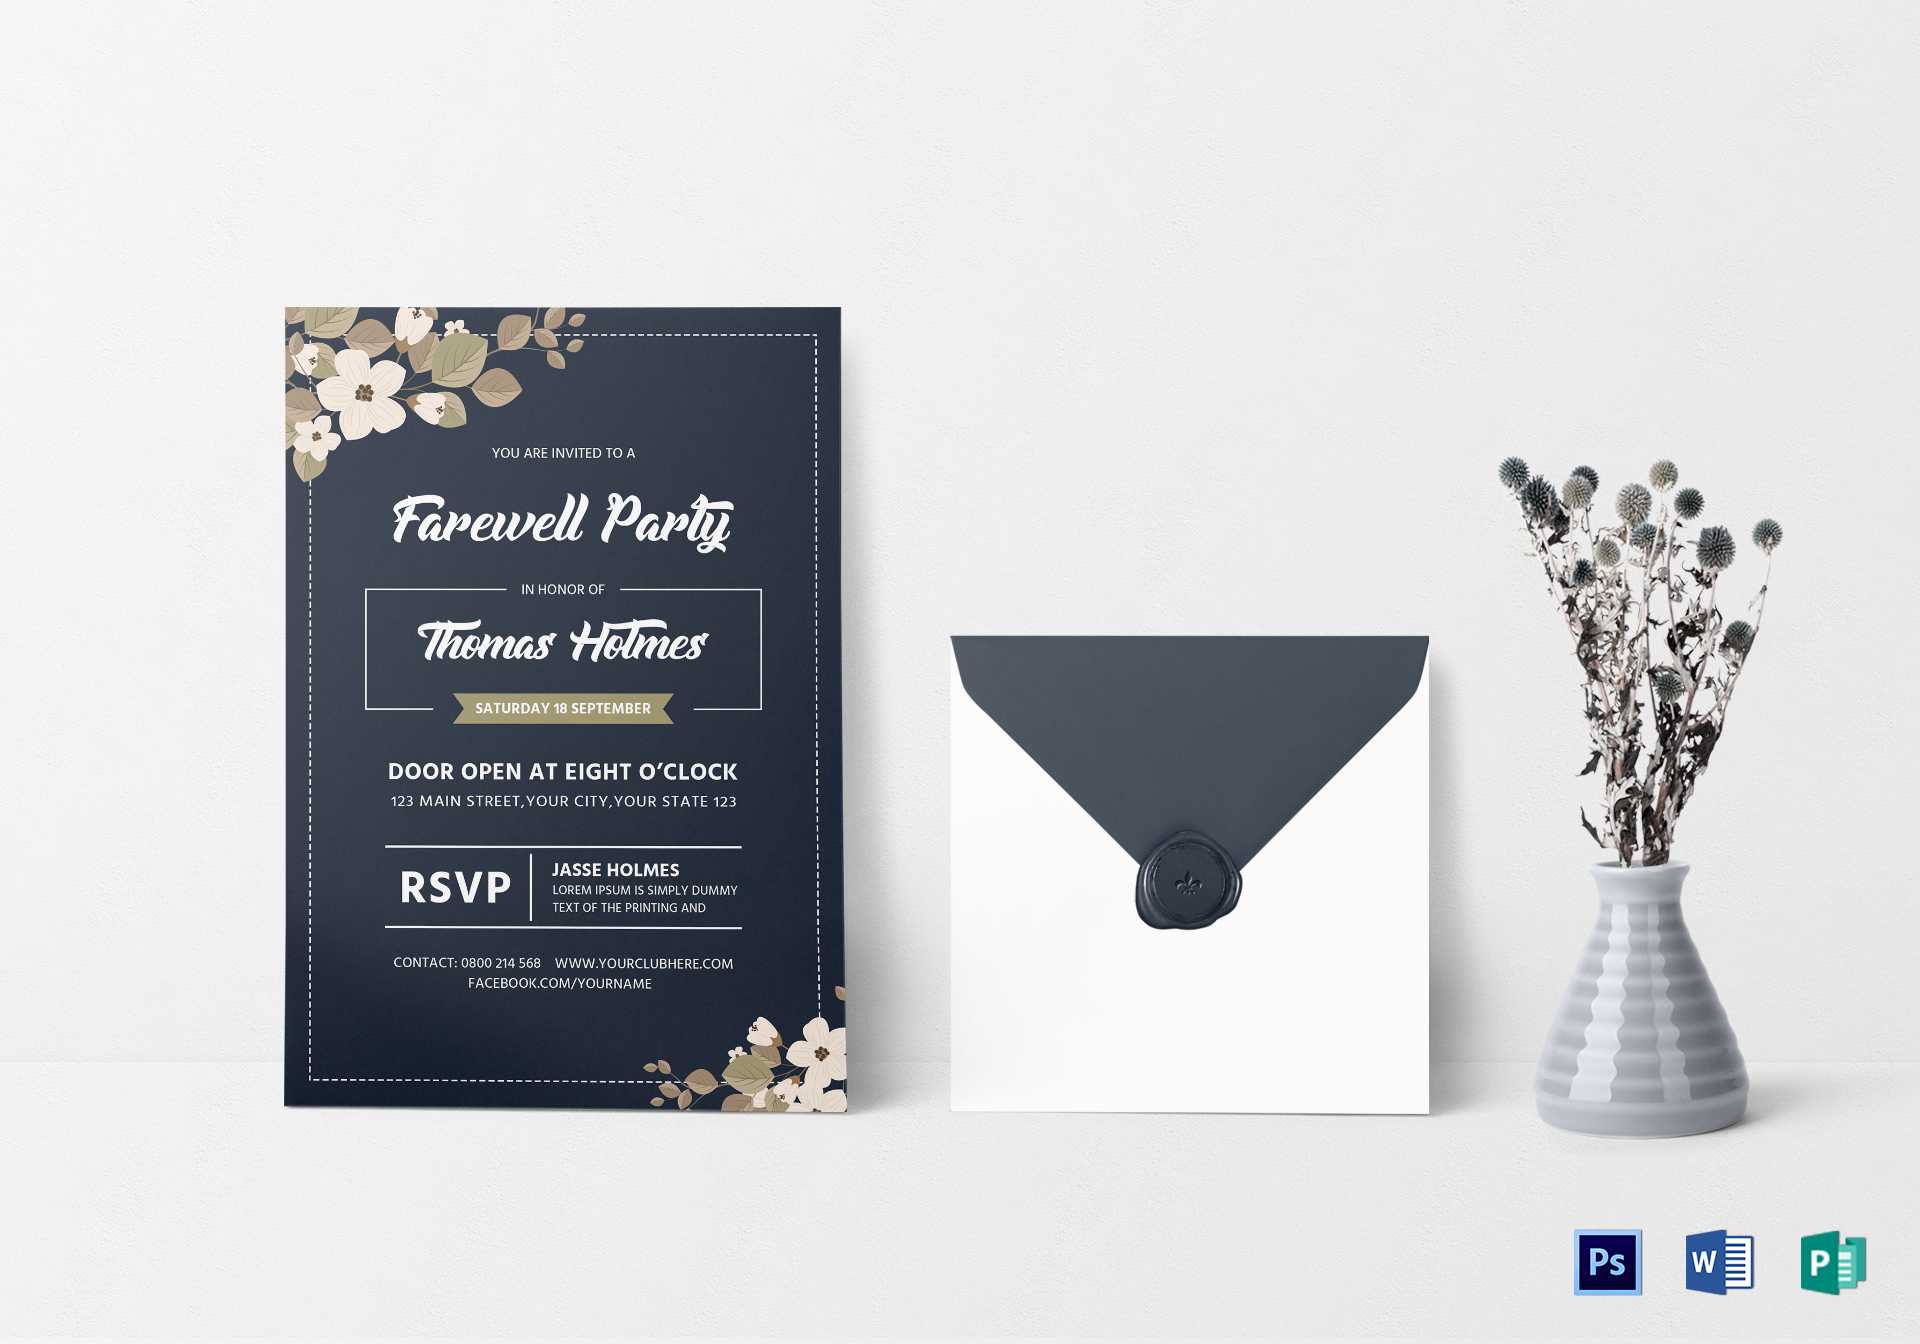 Farewell Party Invitation Card Template Regarding Farewell Inside Farewell Invitation Card Template